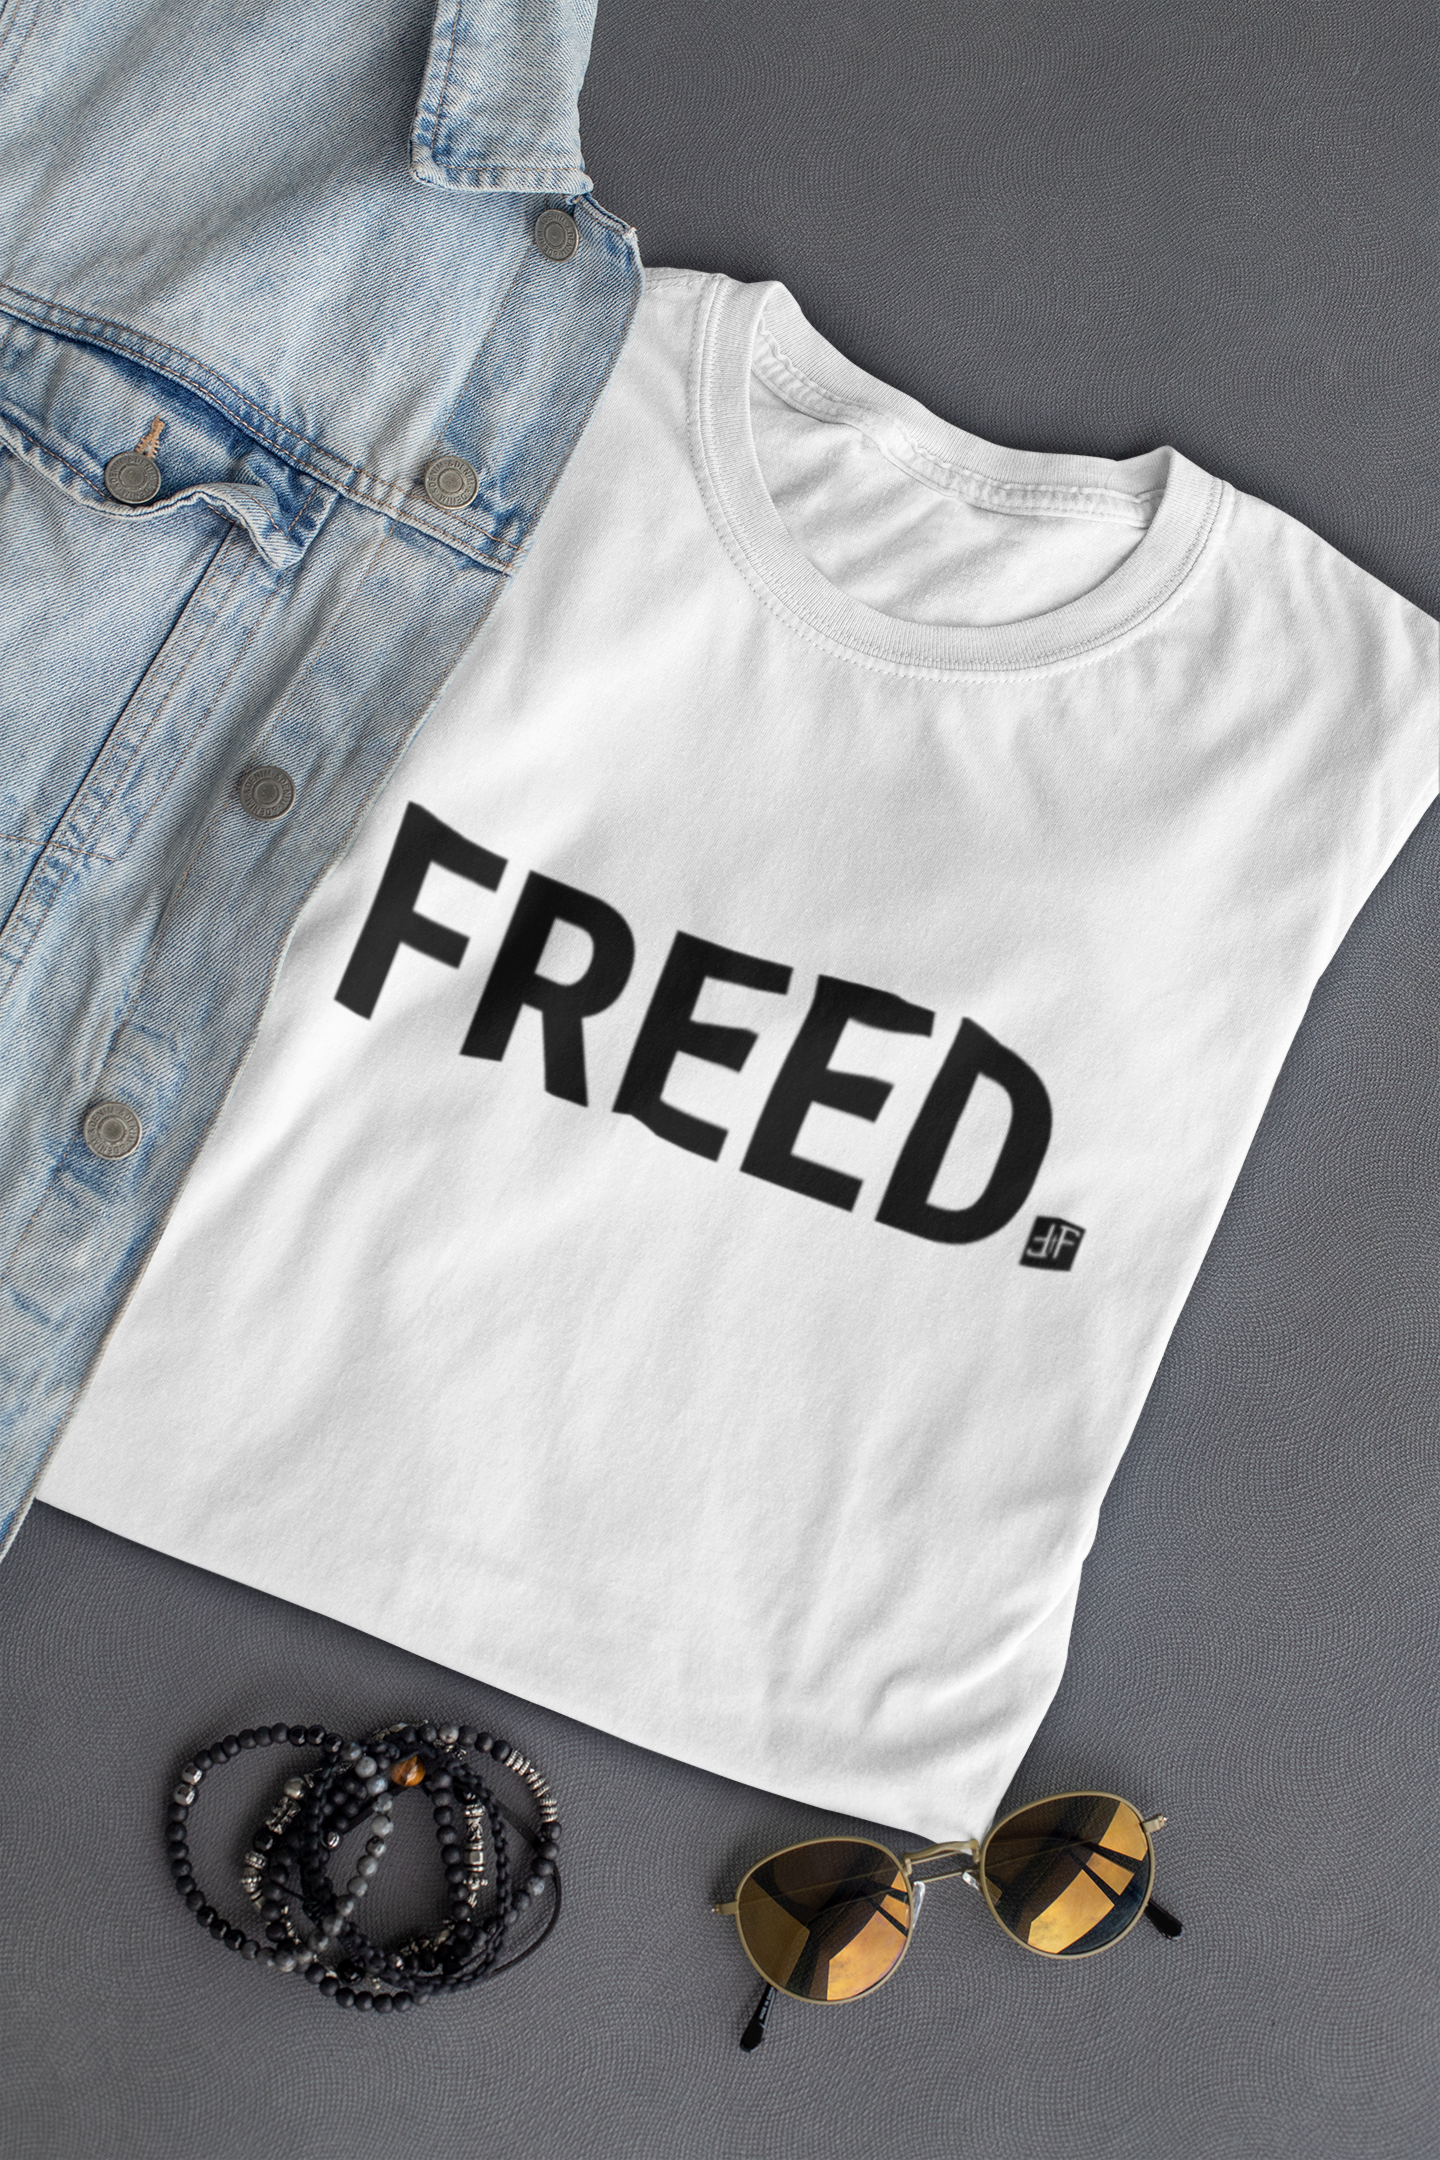 FBF - FREED Limited Edition T-Shirt